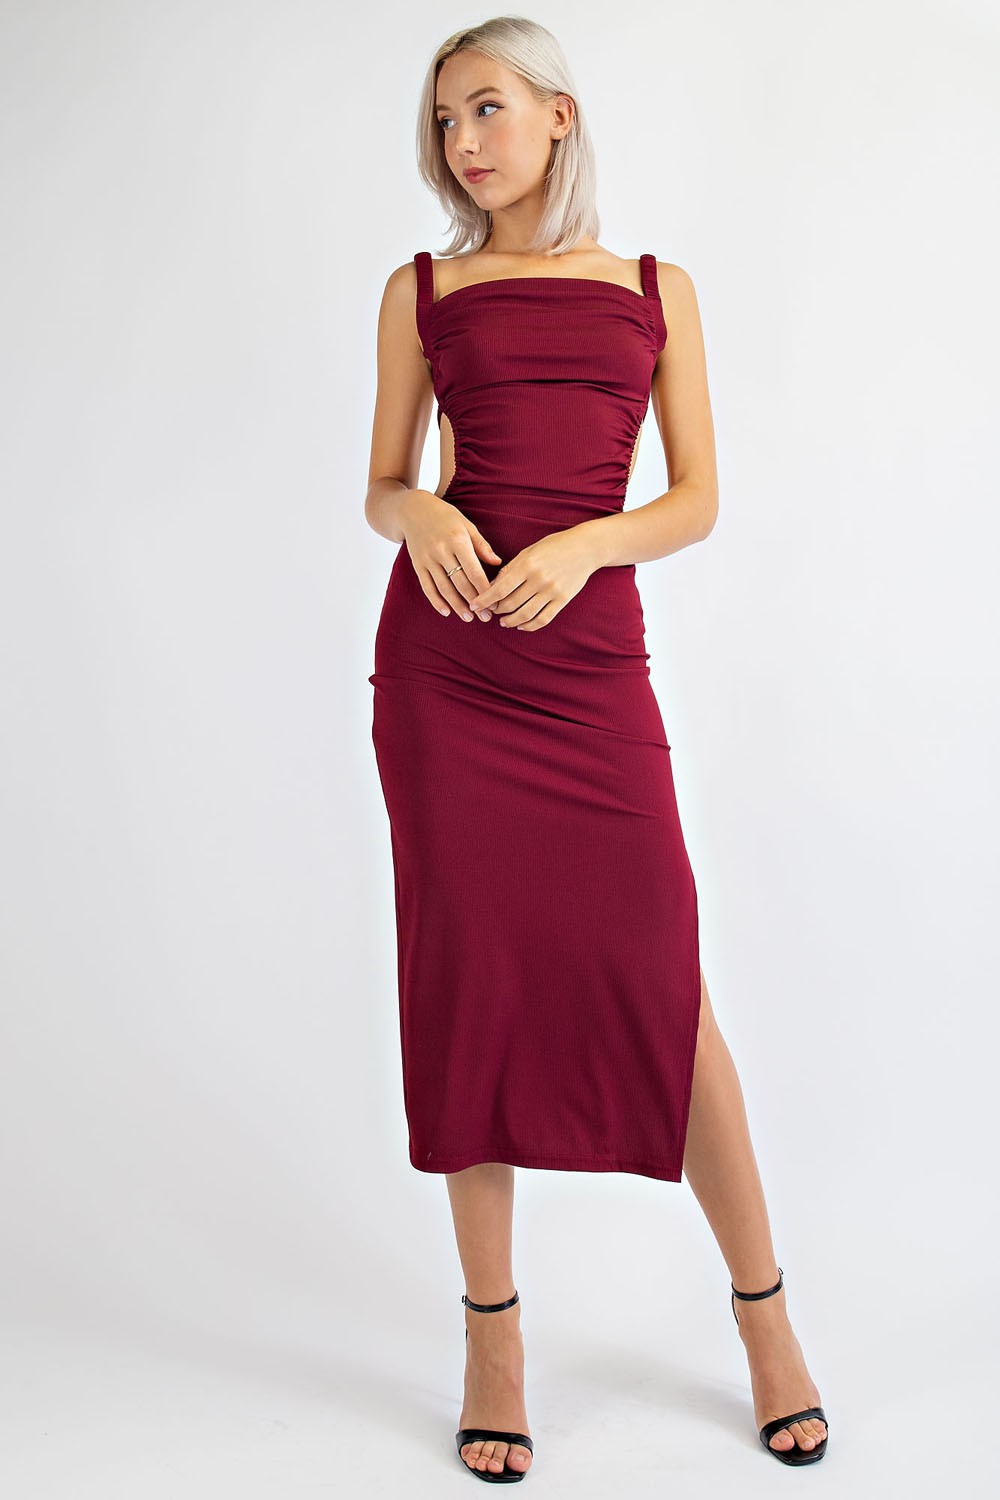 STYLED BY ALX COUTURE MIAMI BOUTIQUE WOMENS DRESS BURGUNDY Burgundy Open Back Long Dress